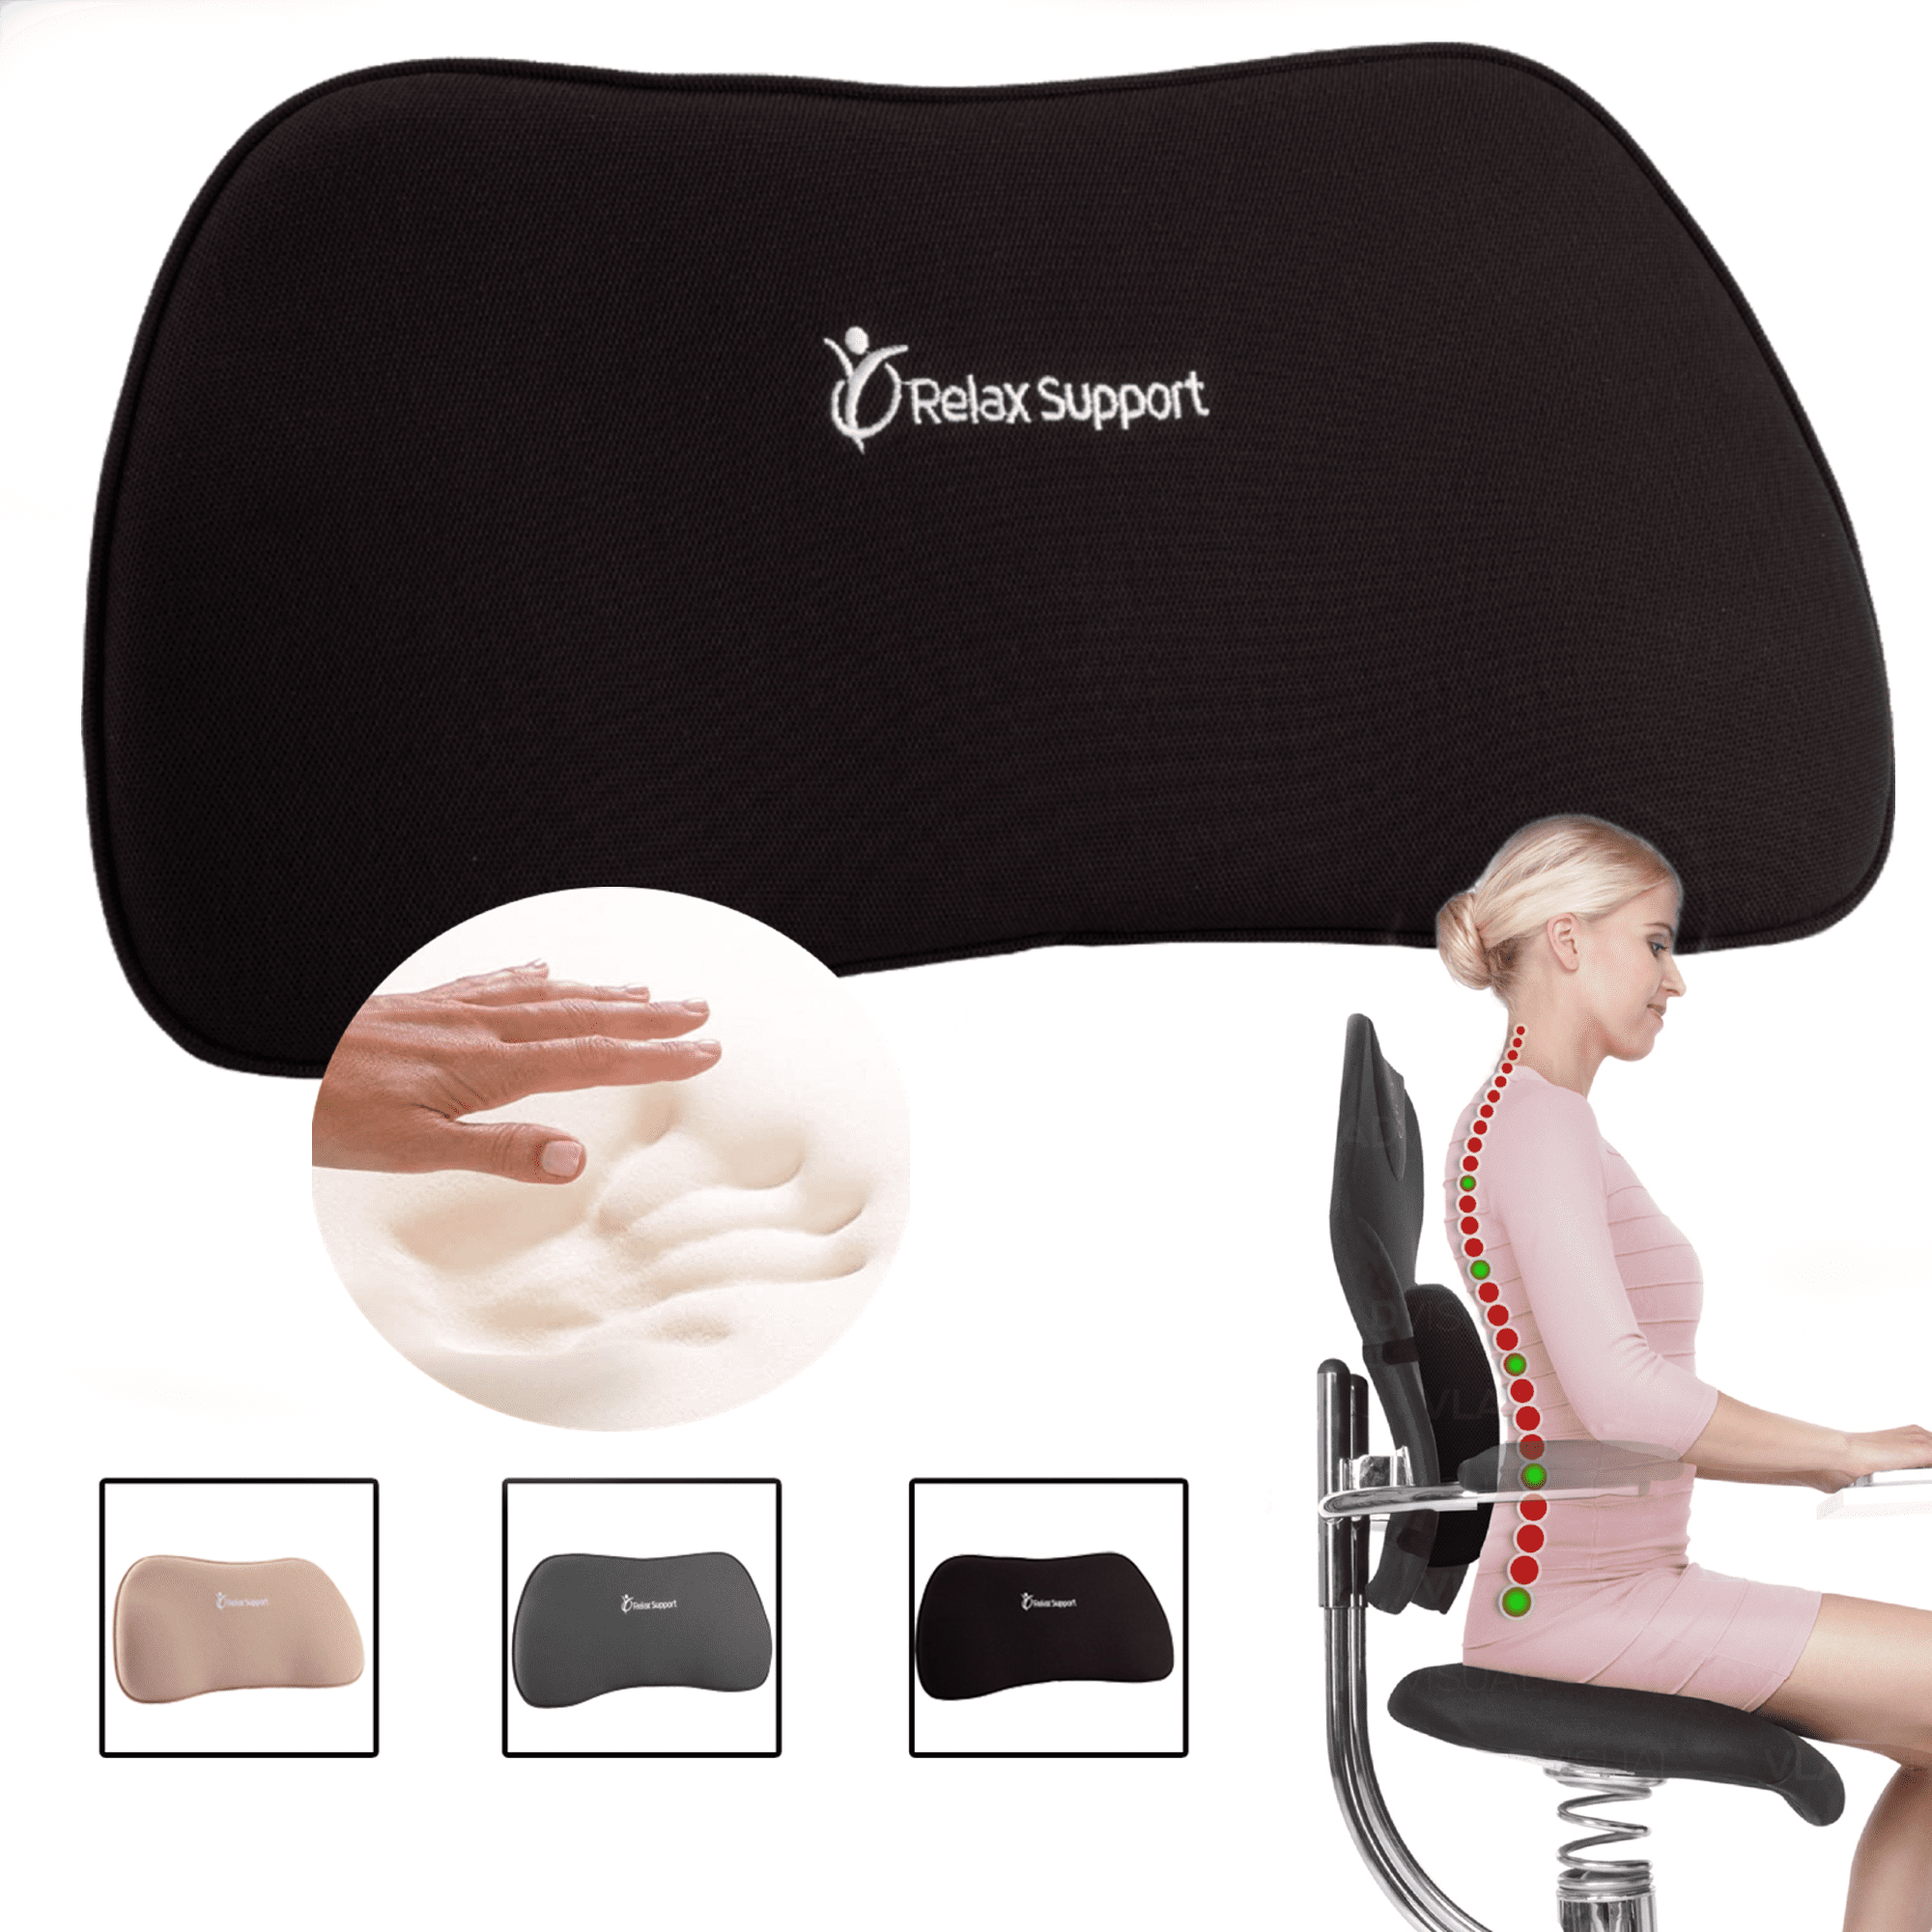 Relax Support Rs13-s Lumbar Support Pillow for Car - Full Memory Foam, Adjustable Dual Straps, Medium Firm - Promotes Good Spinal Posture&comfortable